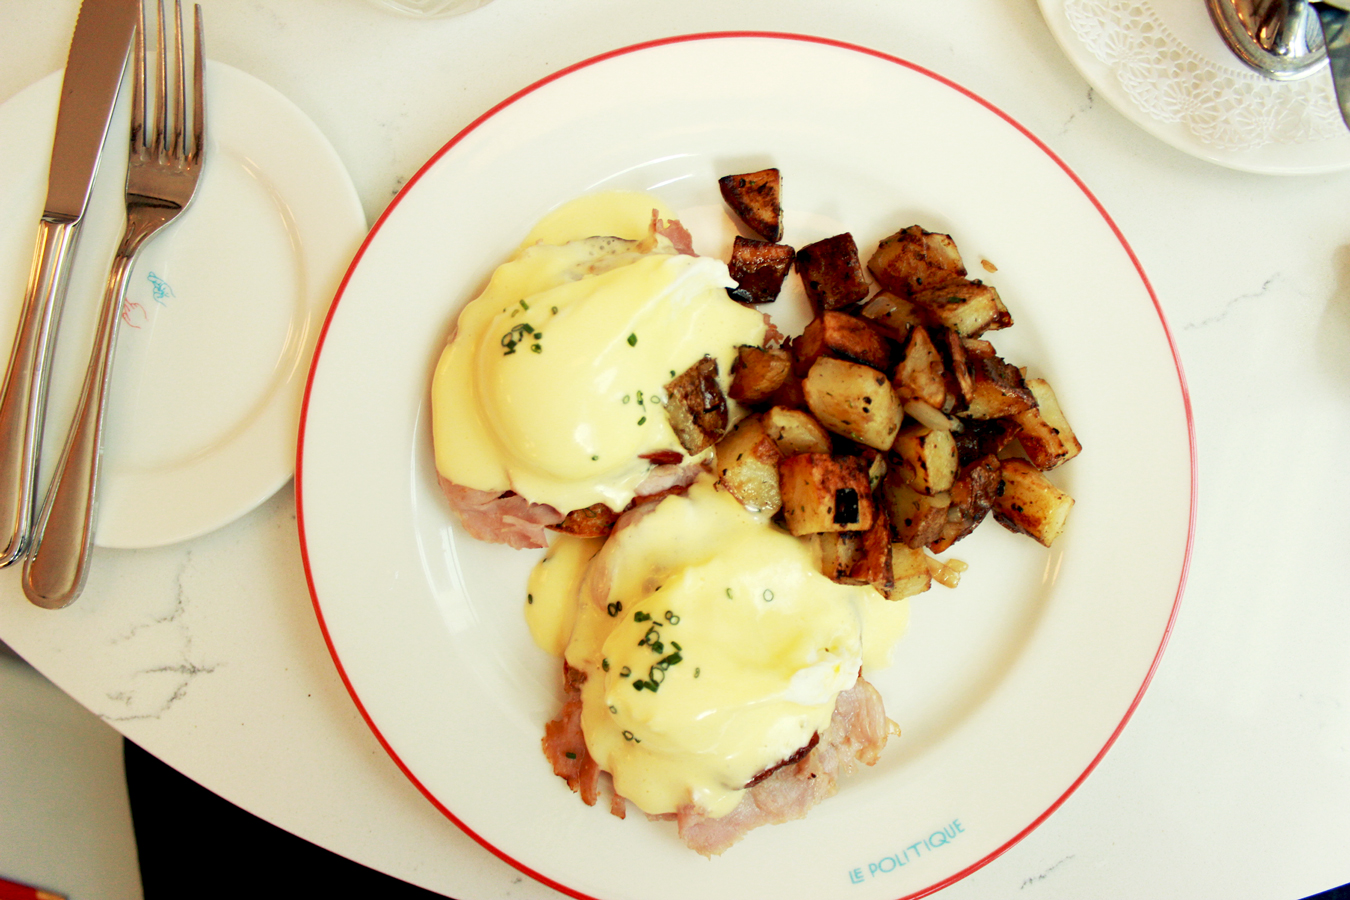 Fixed to Thrill | Brunch at Le Politique